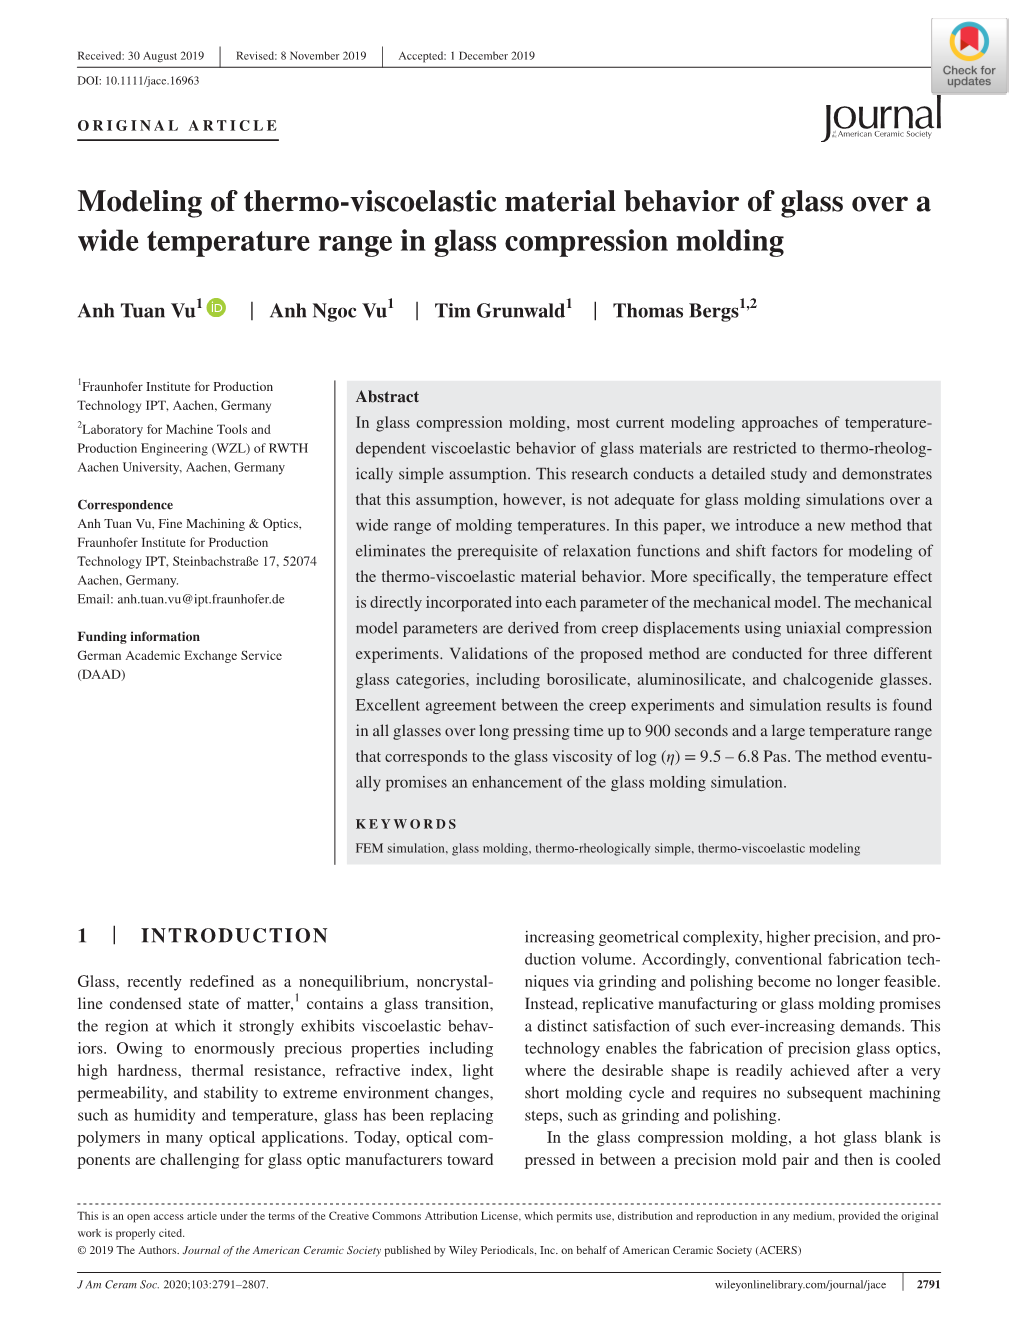 Modeling of Thermo‐Viscoelastic Material Behavior of Glass Over A